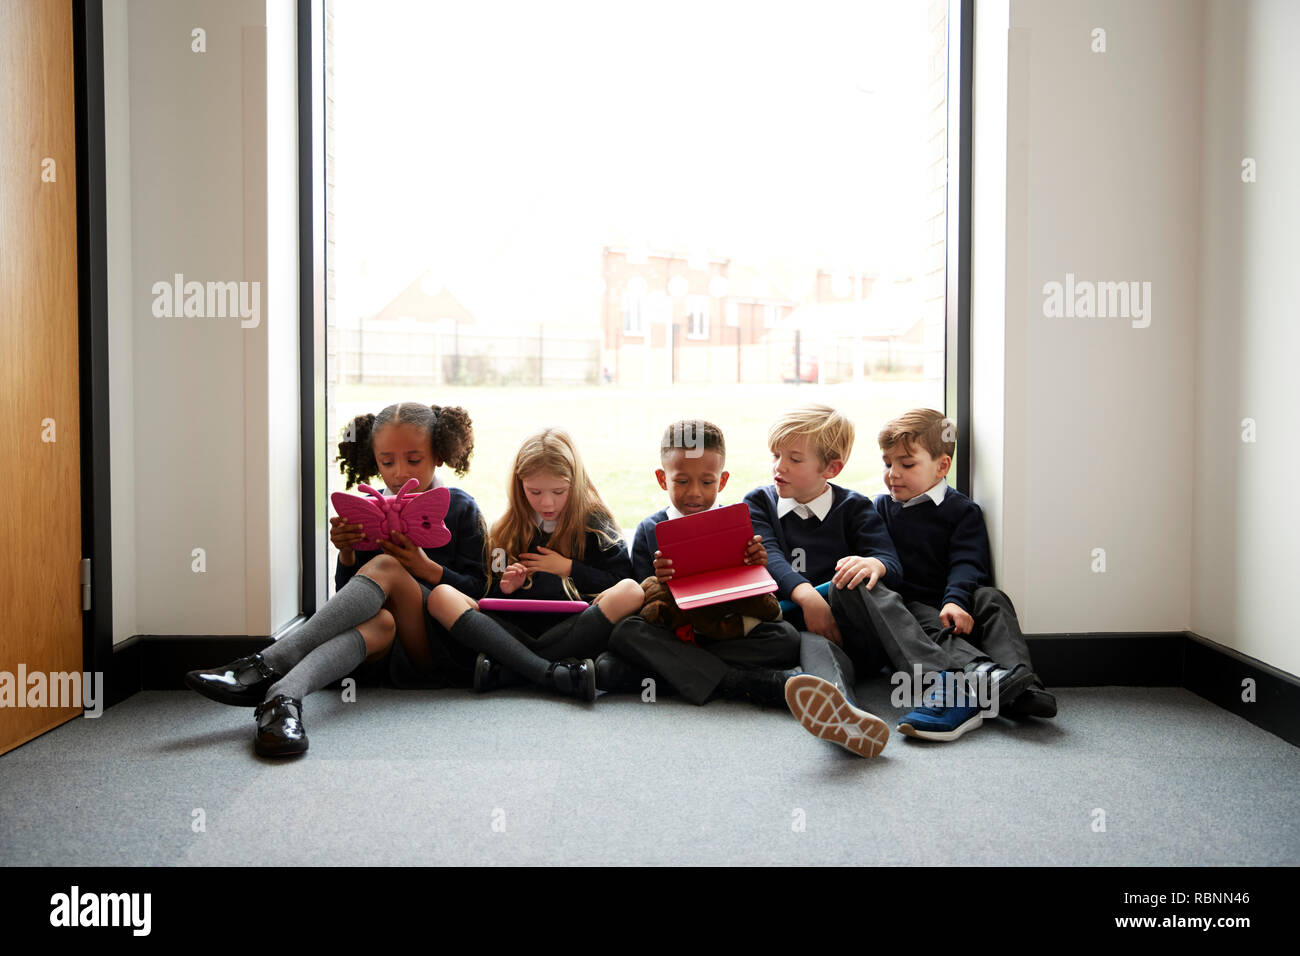 Primary school kids sitting in a row on the floor in front of a window in a school corridor using tablet computers, front view Stock Photo